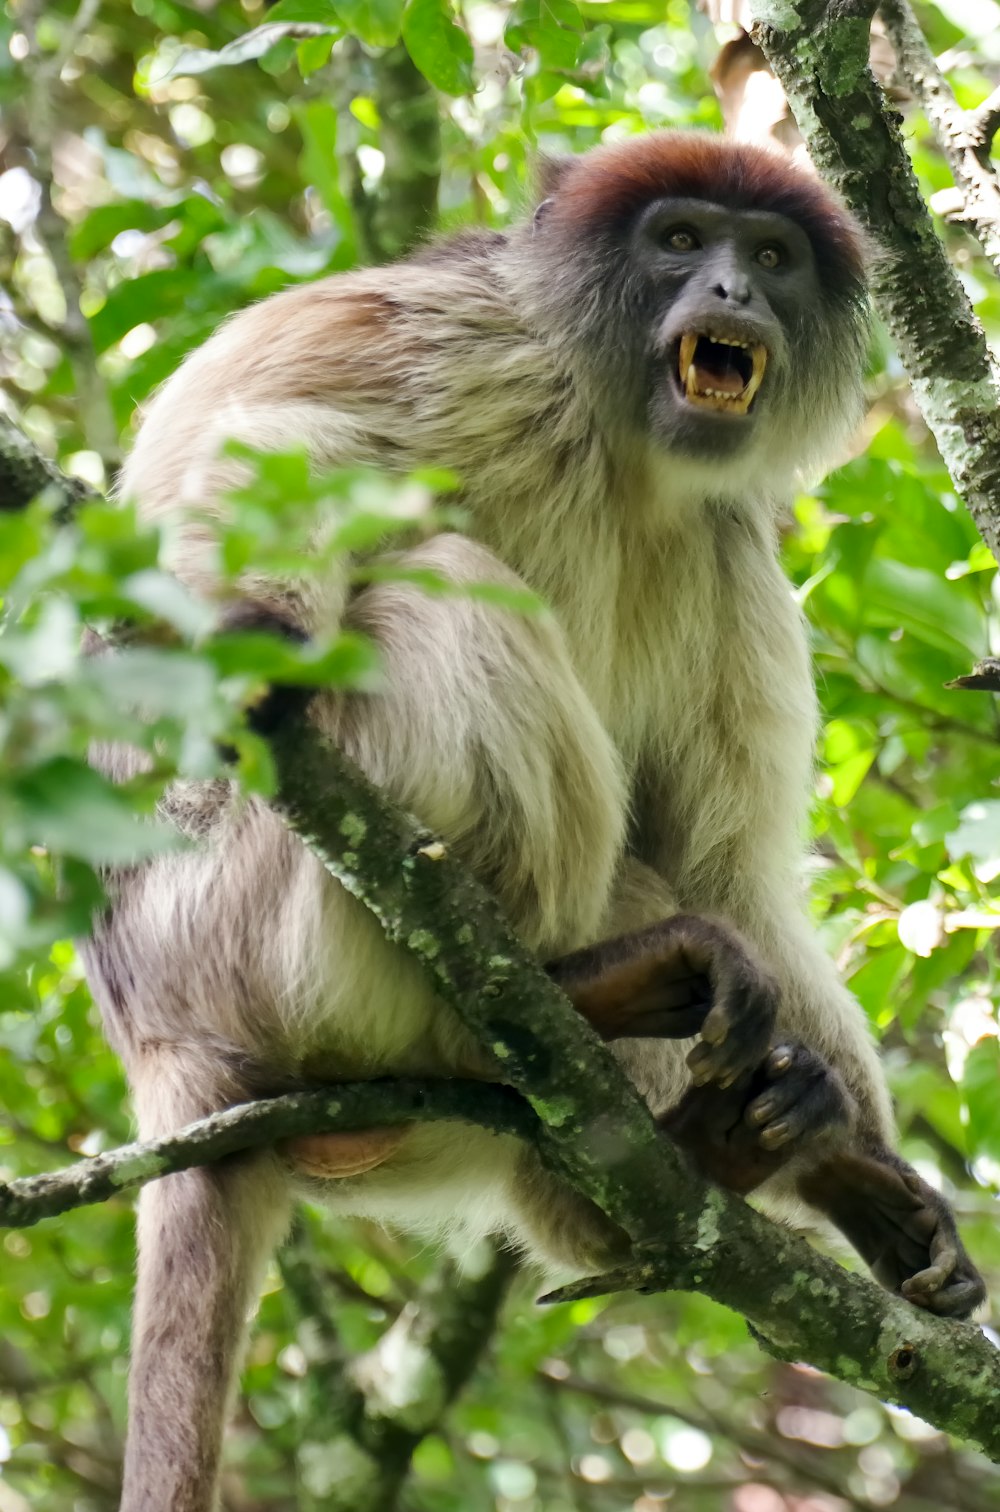 white and brown monkey on tree branch during daytime